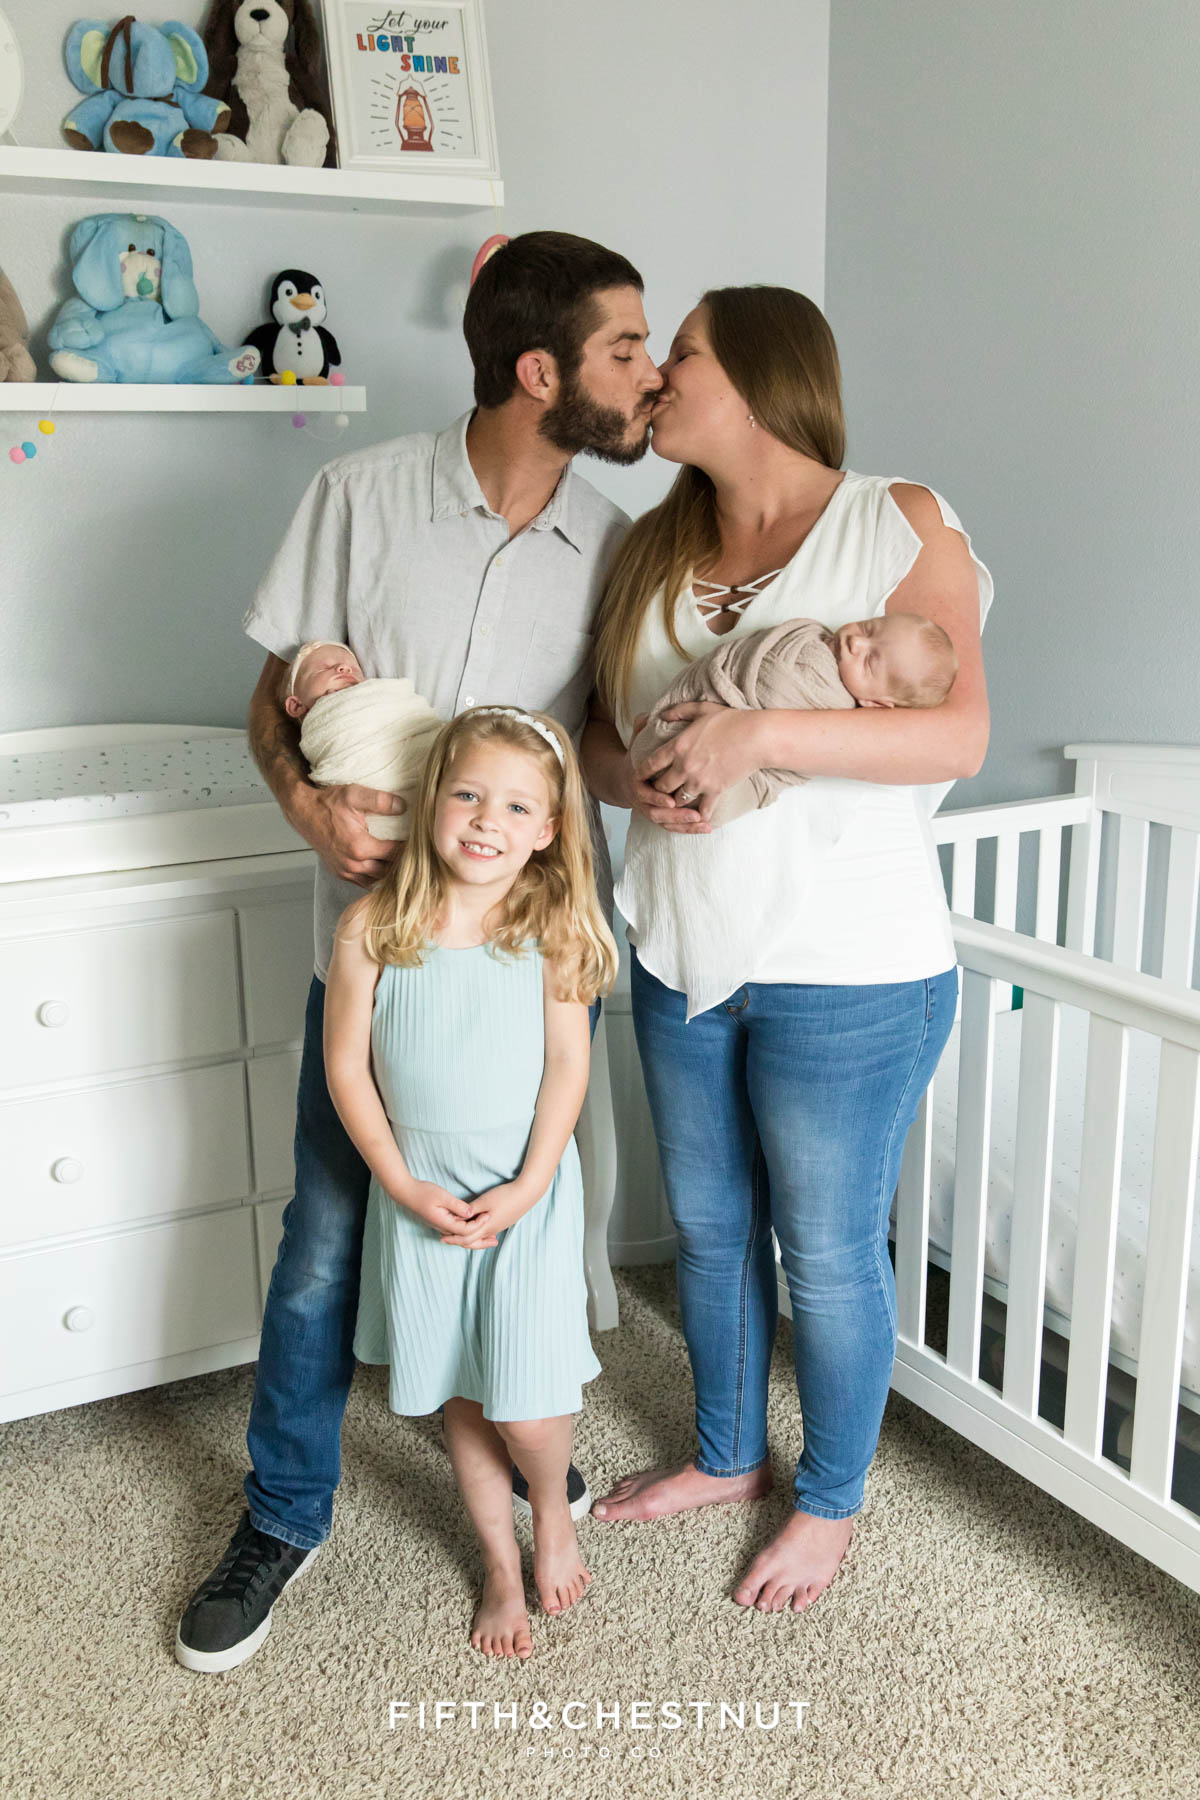 A mom and dad of twins kiss while they hold their new babies